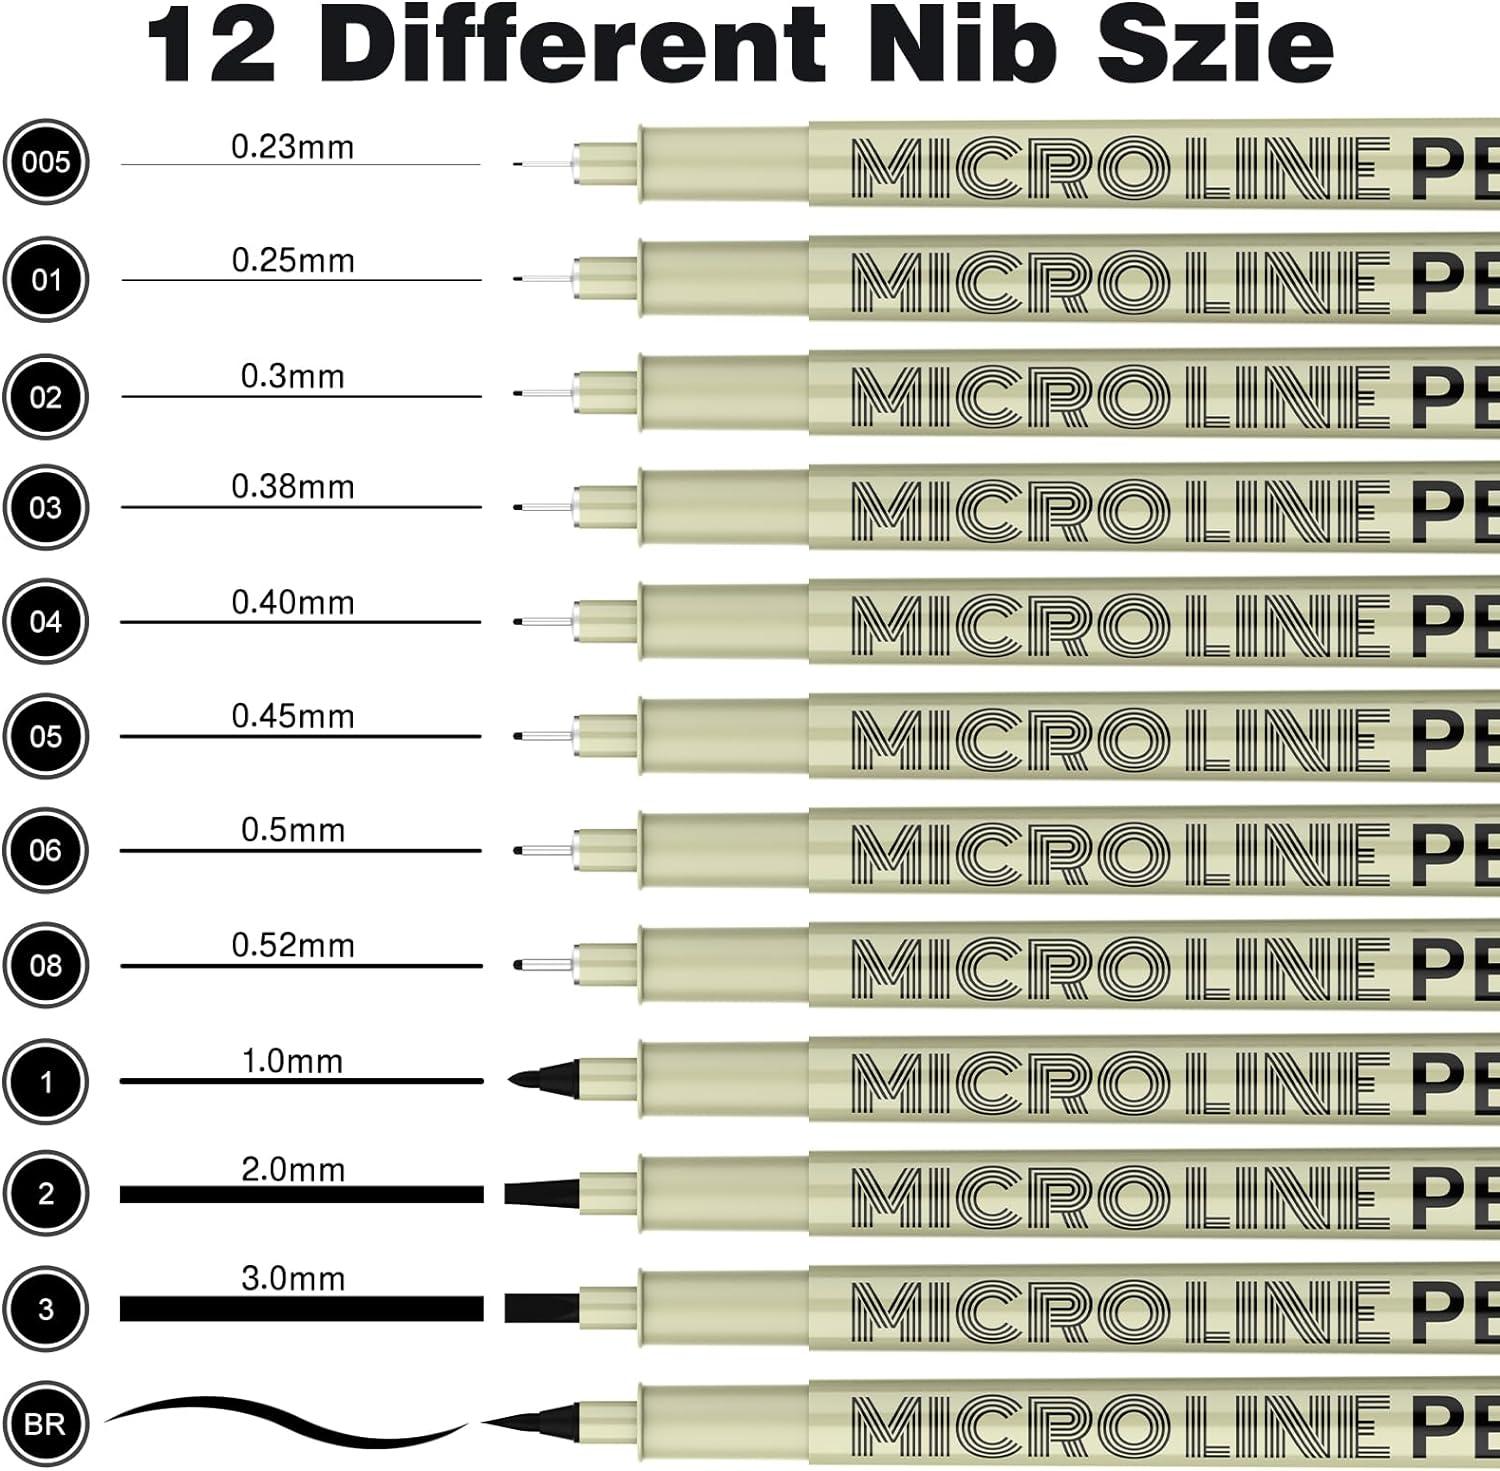  MARTCOLOR 12 Size Micro-Pen Fineliner ink Pens, Black  Waterproof Archival Inking Markers, Multiliner Pen, Illustration Pen, Art  Pen for Sketch, Watercolor, Anime, Manga, Technical Drawing : Arts, Crafts  & Sewing